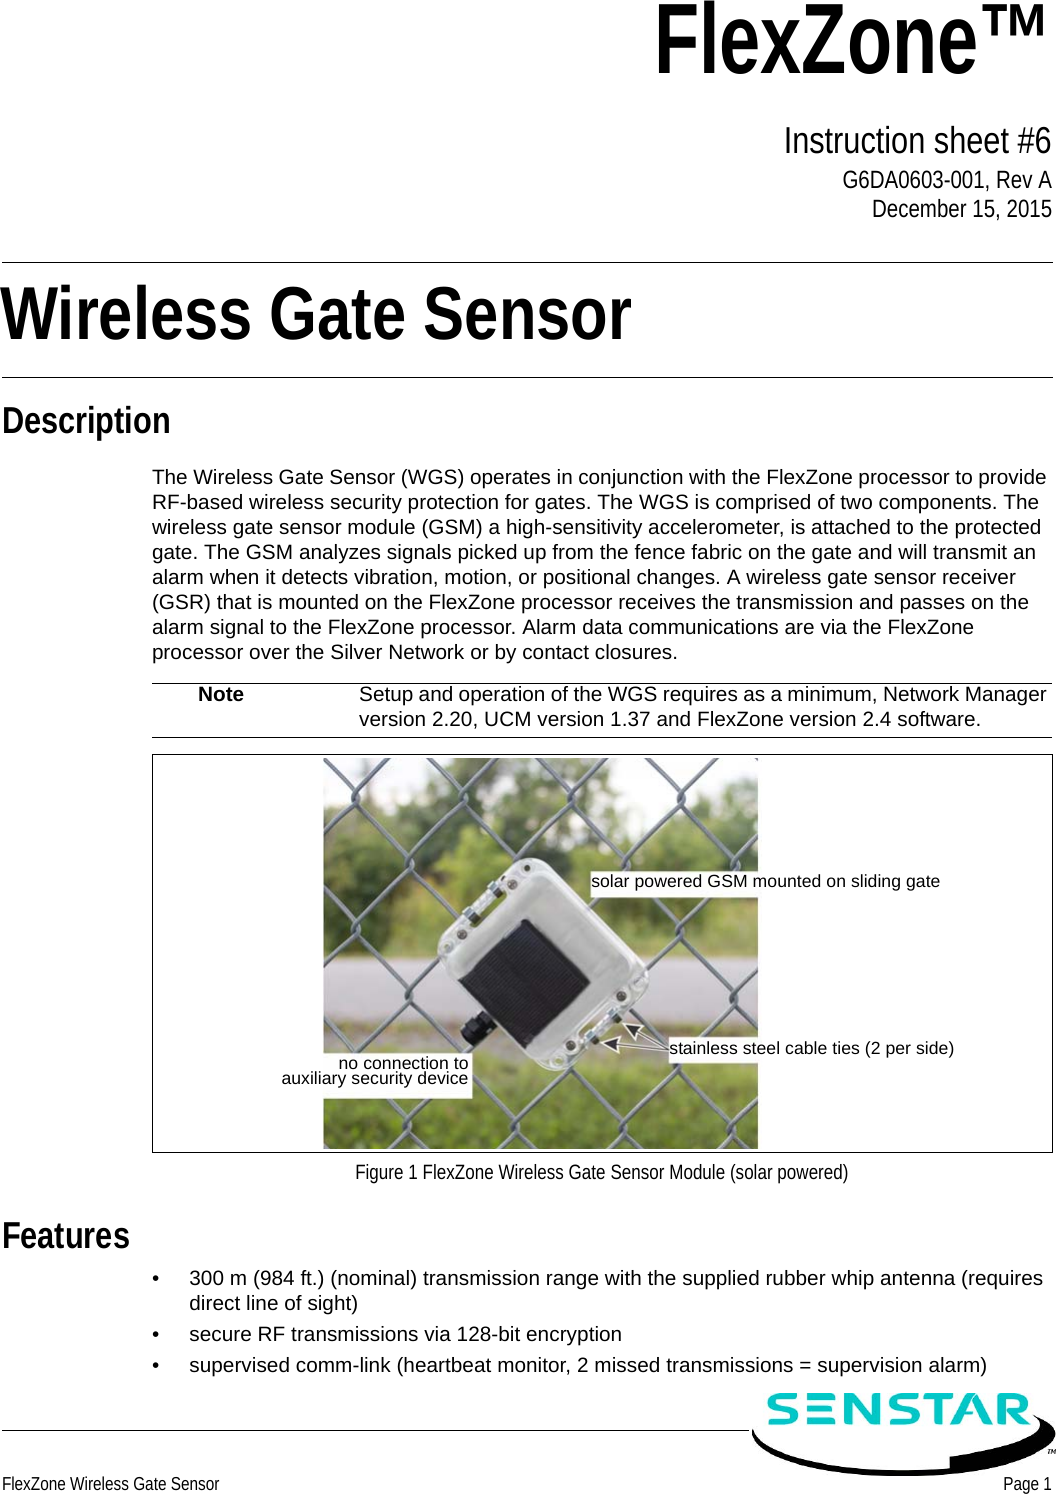 FlexZone Wireless Gate Sensor Page 1FlexZone™Instruction sheet #6G6DA0603-001, Rev ADecember 15, 2015DescriptionThe Wireless Gate Sensor (WGS) operates in conjunction with the FlexZone processor to provide RF-based wireless security protection for gates. The WGS is comprised of two components. The wireless gate sensor module (GSM) a high-sensitivity accelerometer, is attached to the protected gate. The GSM analyzes signals picked up from the fence fabric on the gate and will transmit an alarm when it detects vibration, motion, or positional changes. A wireless gate sensor receiver (GSR) that is mounted on the FlexZone processor receives the transmission and passes on the alarm signal to the FlexZone processor. Alarm data communications are via the FlexZone processor over the Silver Network or by contact closures. Features• 300 m (984 ft.) (nominal) transmission range with the supplied rubber whip antenna (requires direct line of sight)• secure RF transmissions via 128-bit encryption• supervised comm-link (heartbeat monitor, 2 missed transmissions = supervision alarm)Note Setup and operation of the WGS requires as a minimum, Network Manager version 2.20, UCM version 1.37 and FlexZone version 2.4 software.Figure 1 FlexZone Wireless Gate Sensor Module (solar powered)solar powered GSM mounted on sliding gatestainless steel cable ties (2 per side)no connection toauxiliary security deviceWireless Gate Sensor 